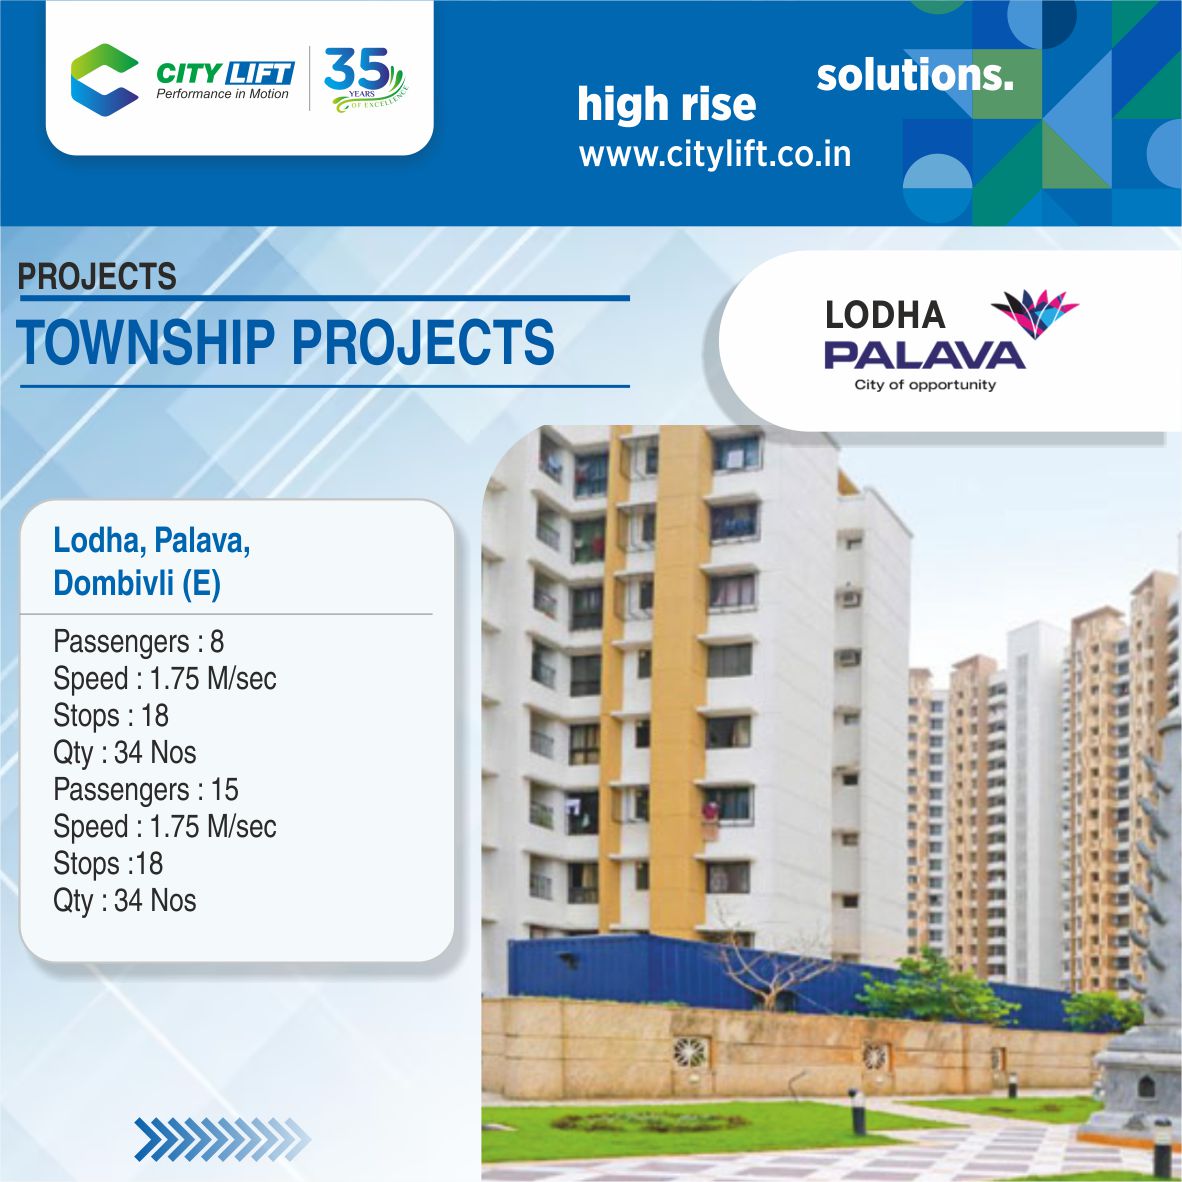 TOWNSHIP PROJECTS